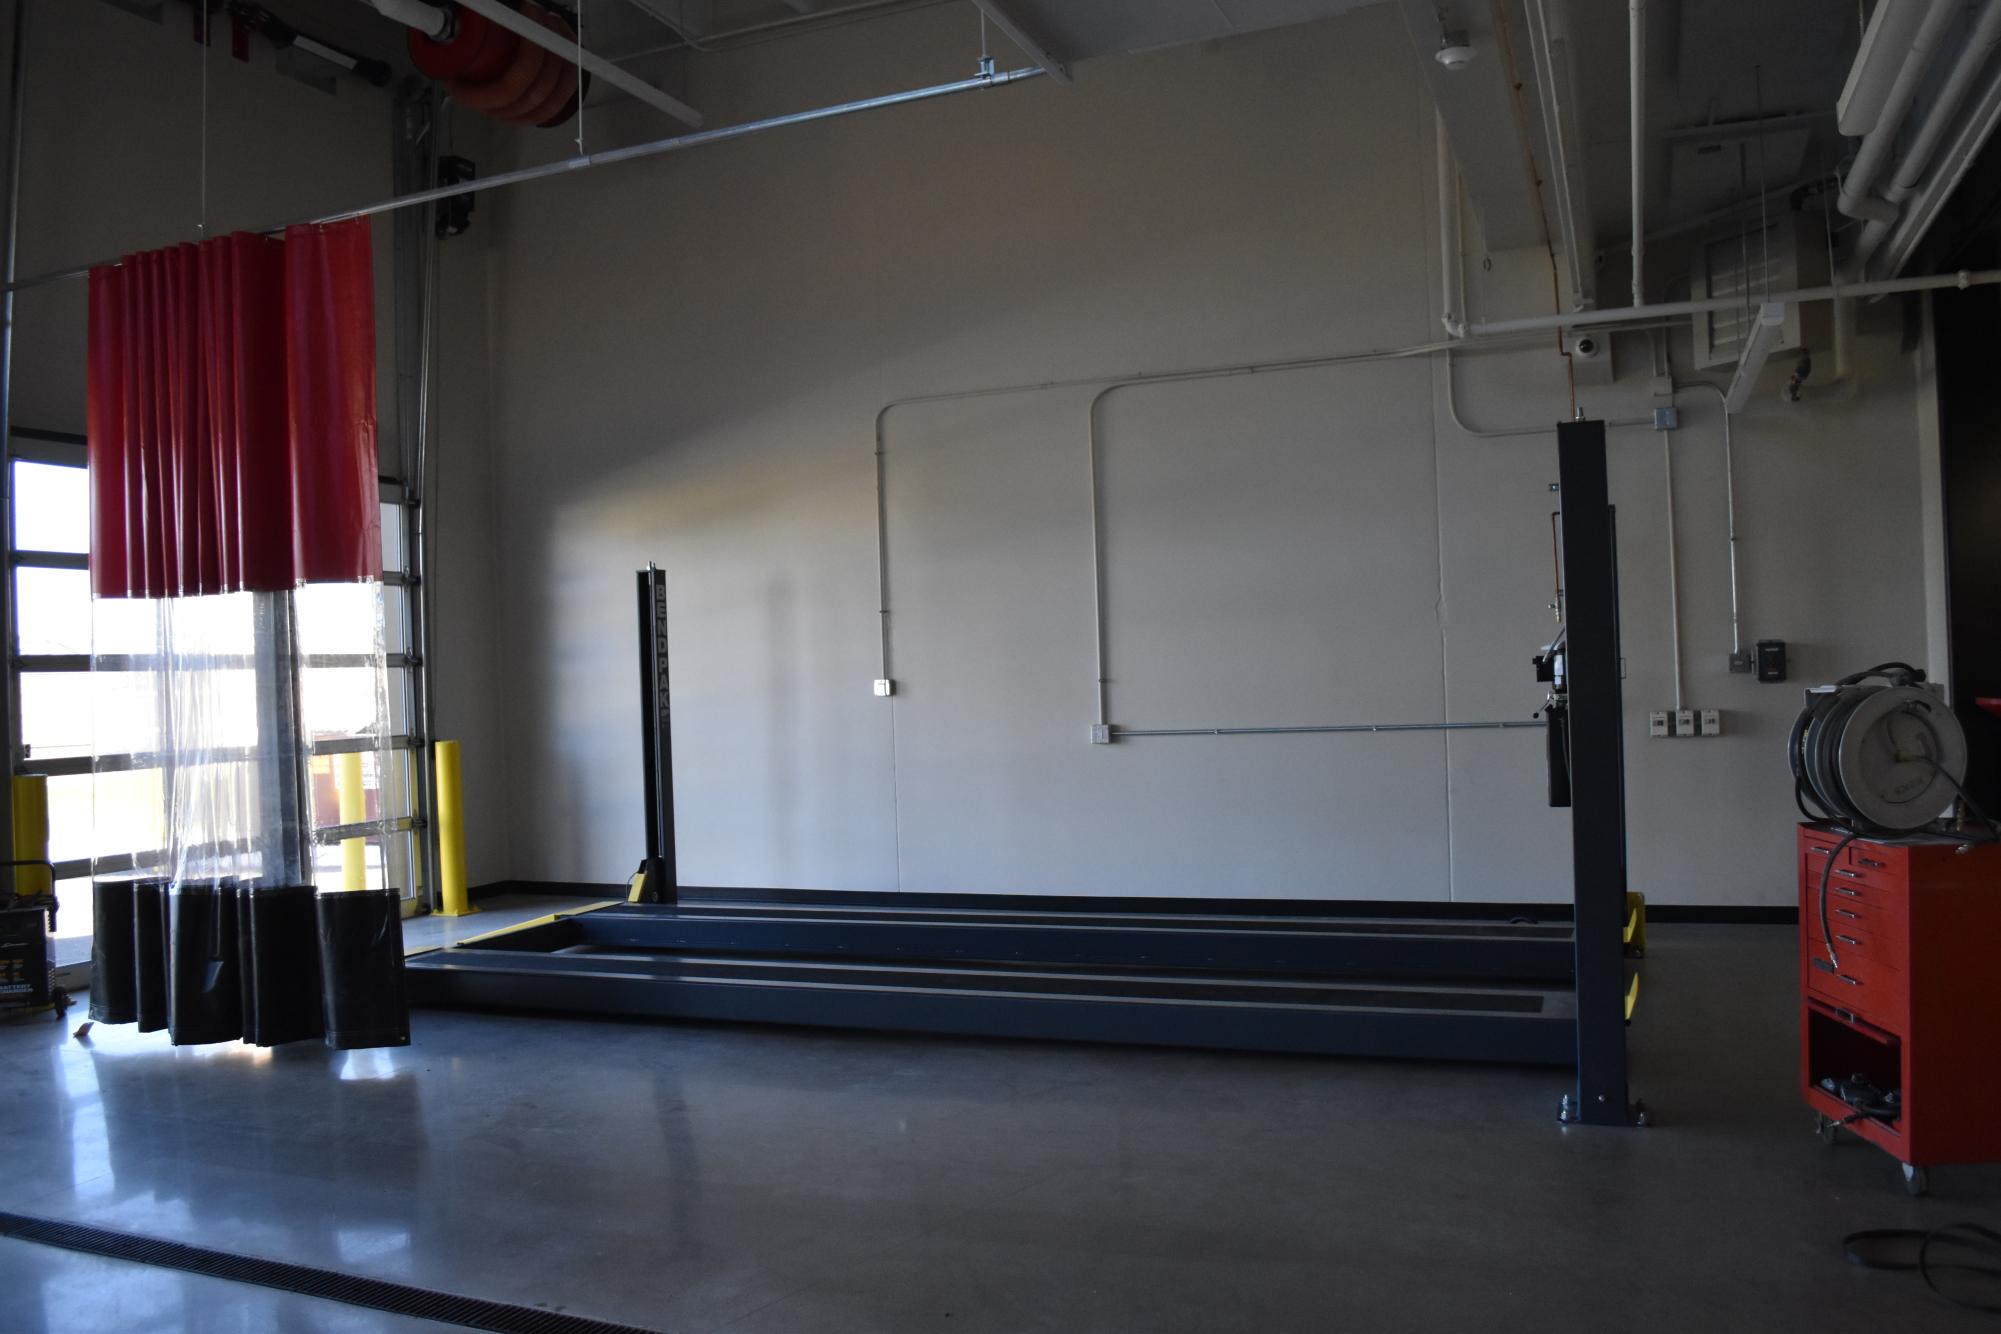 New car lifts have been added to the auto shop. 